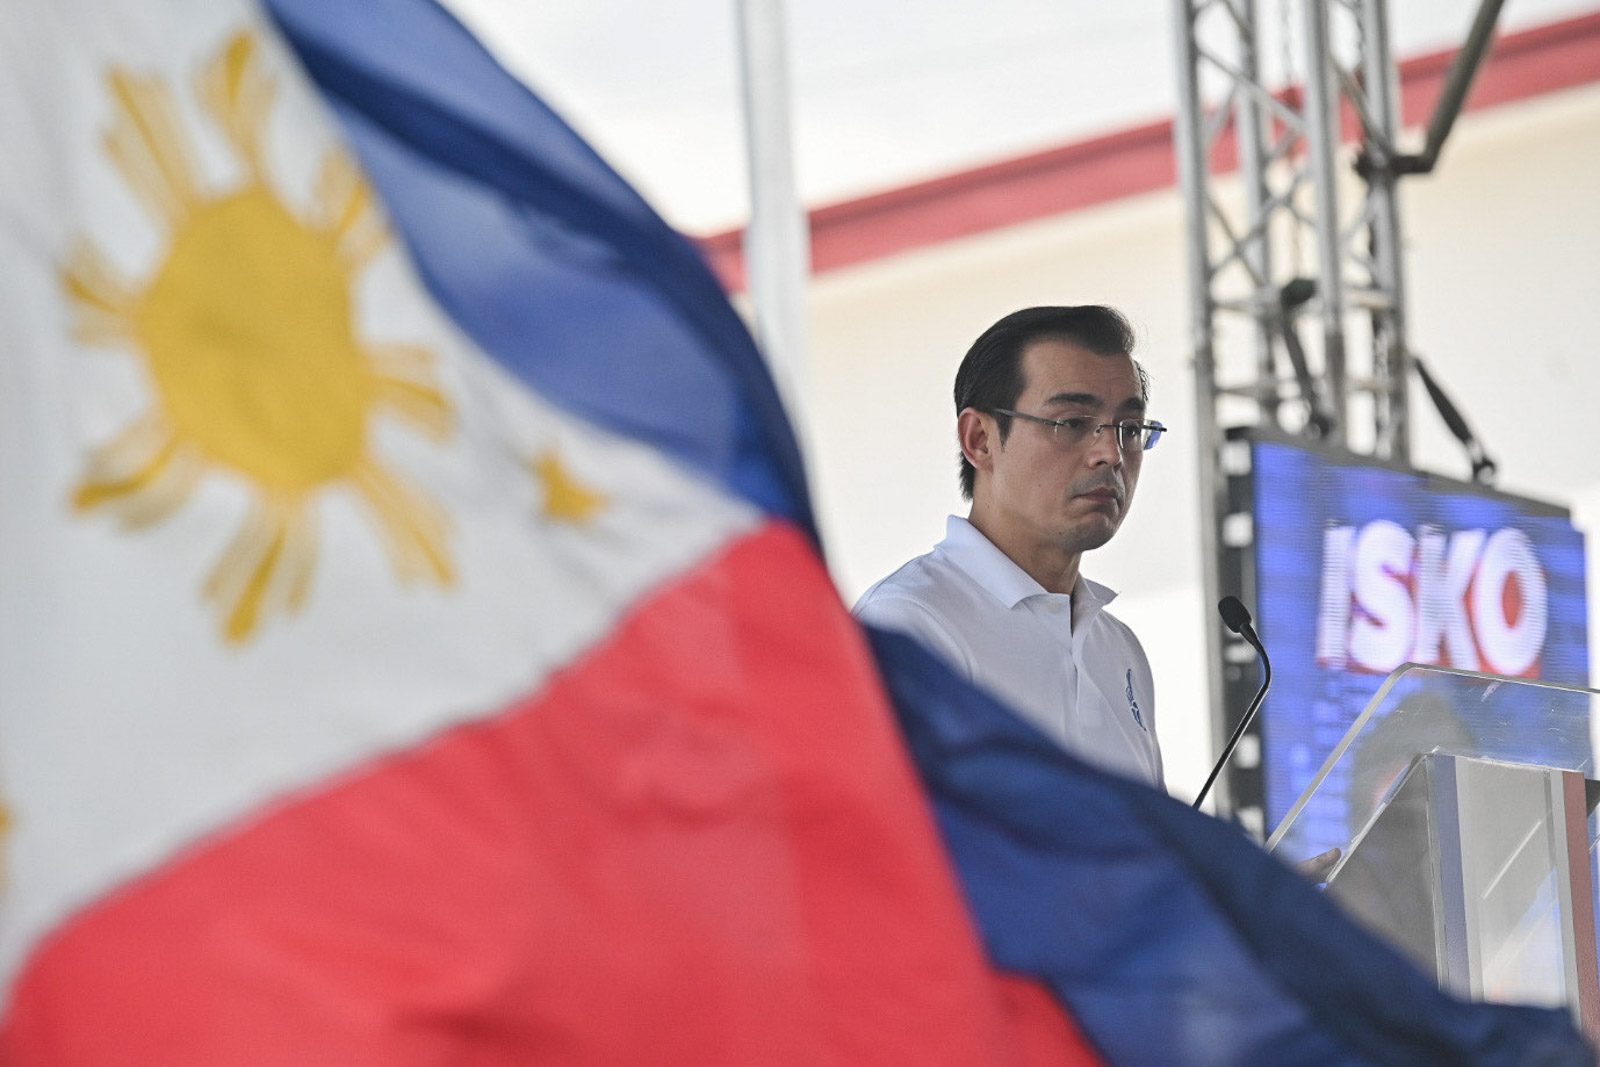 Isko Moreno to appoint former Navy officer as defense chief if elected president